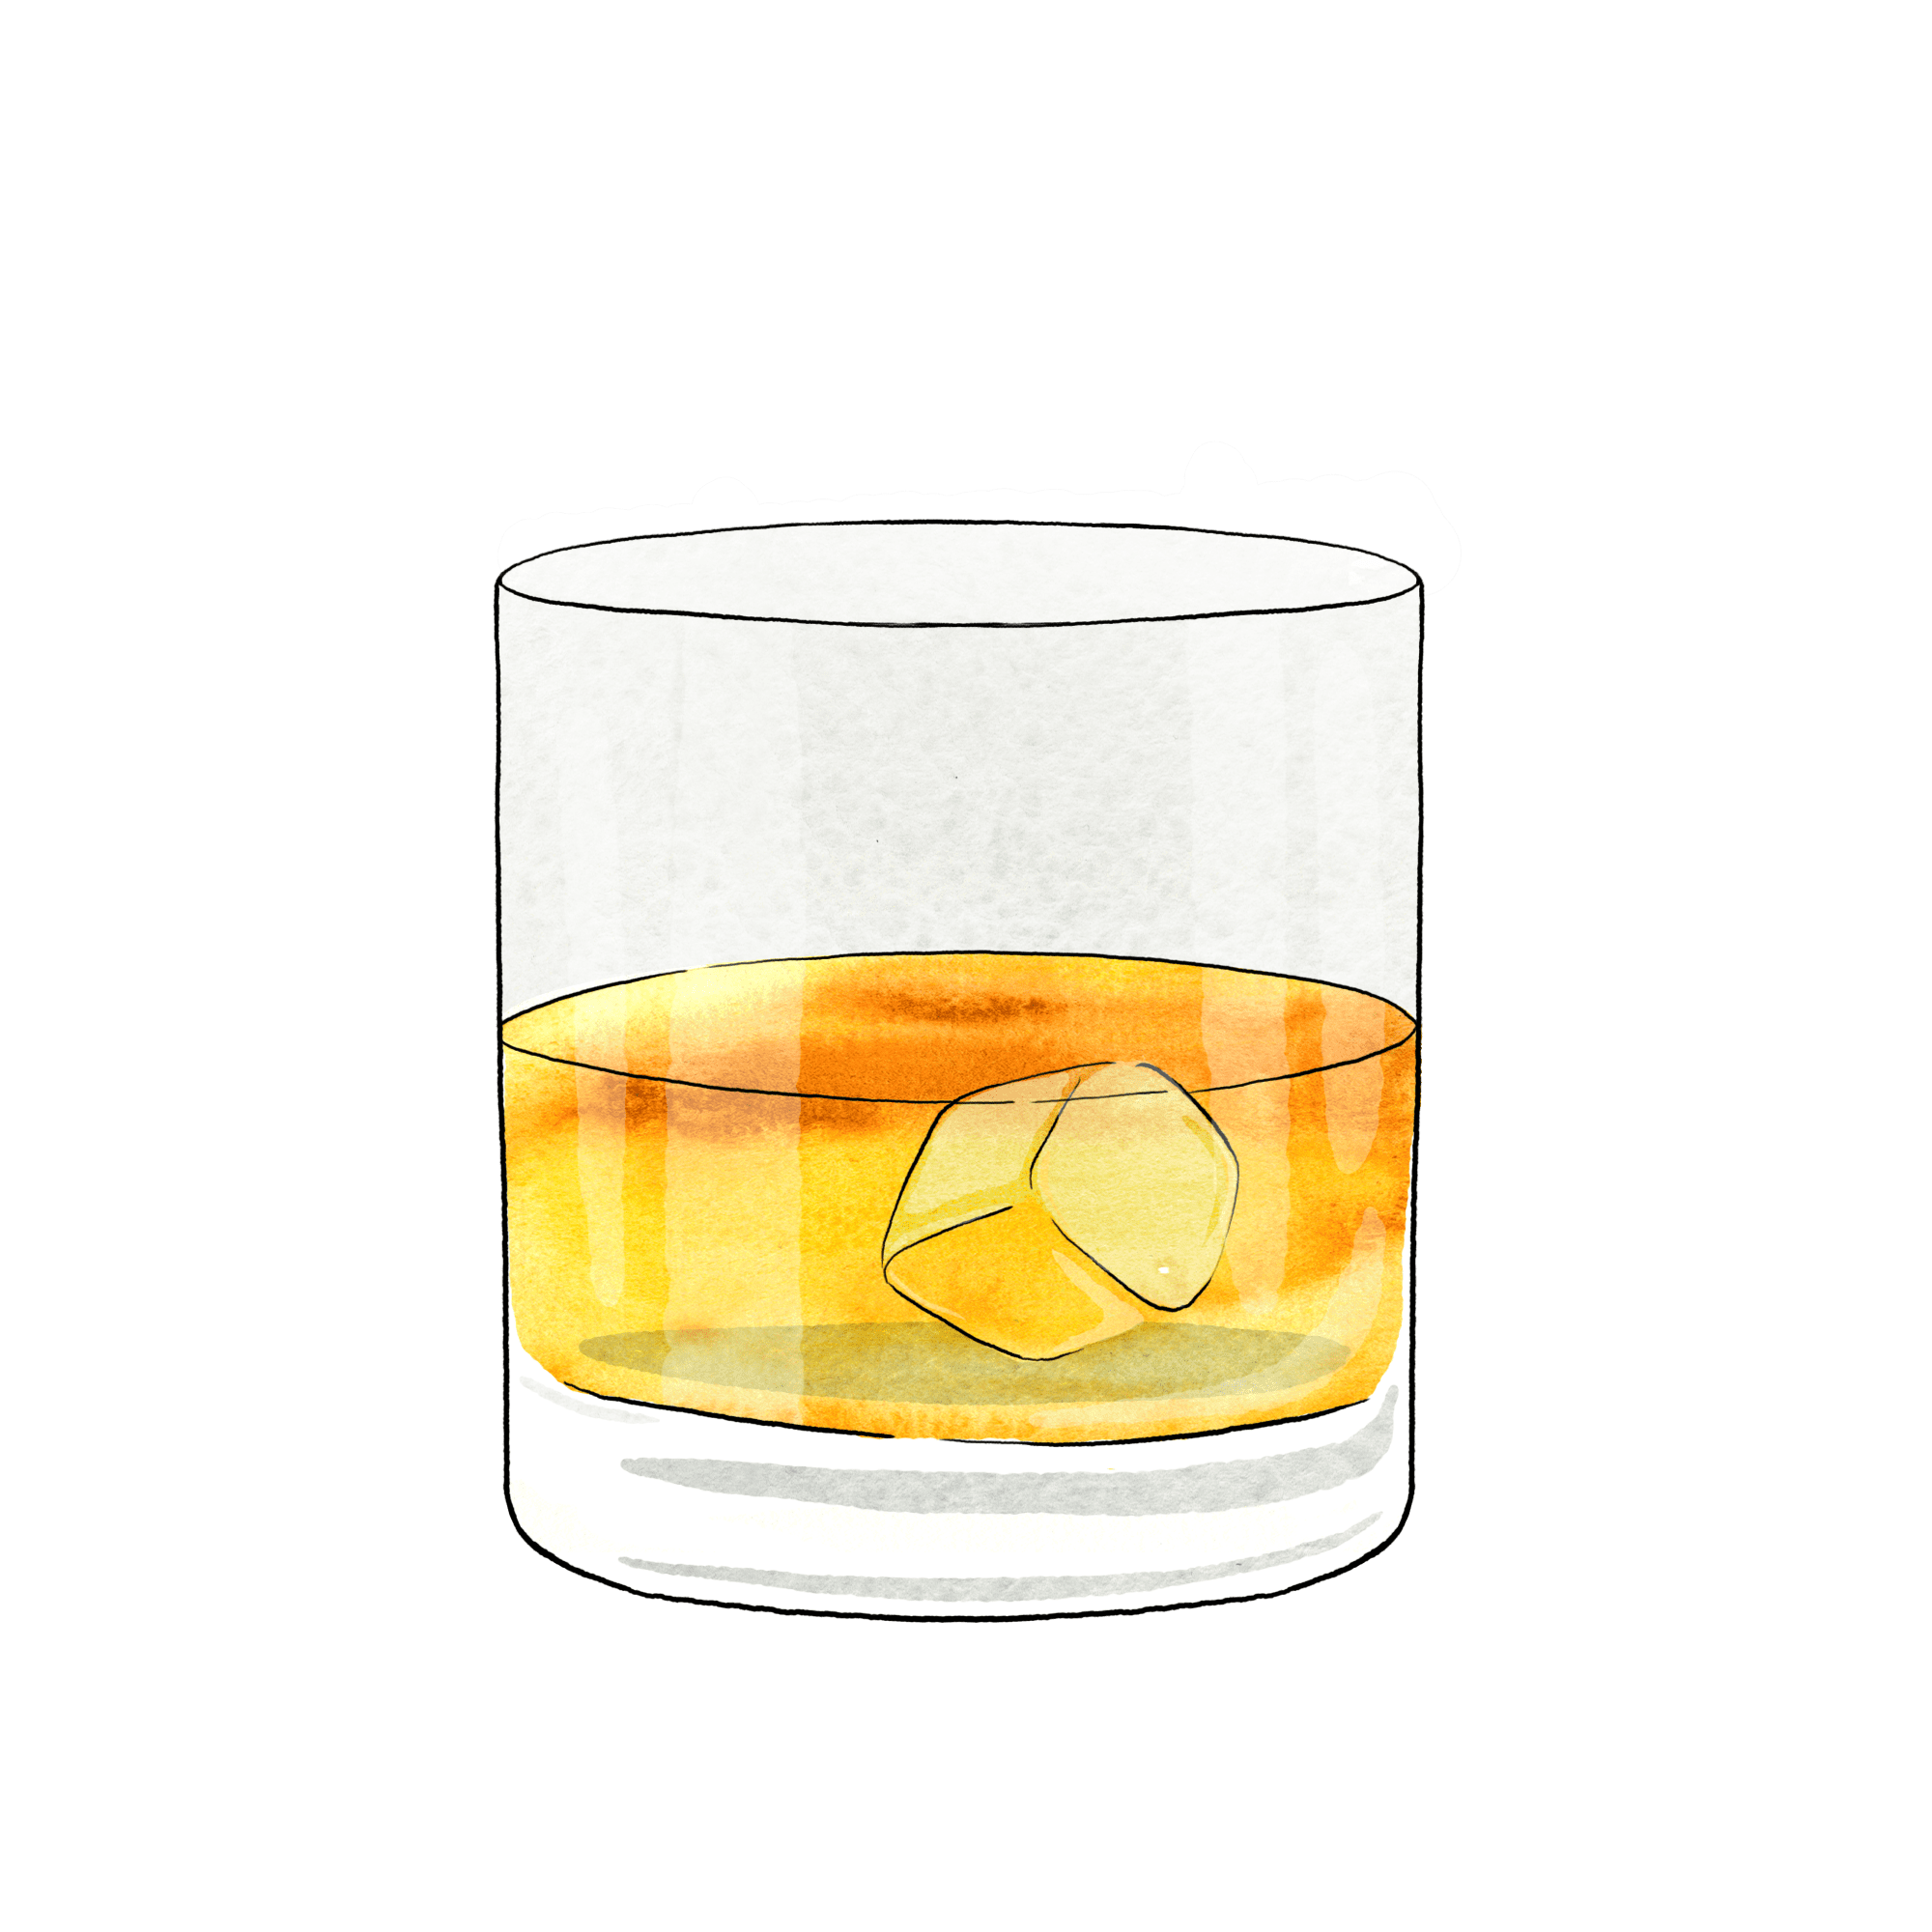 IU C&I Studios Page Alcoholic drink in a glass artwork graphic